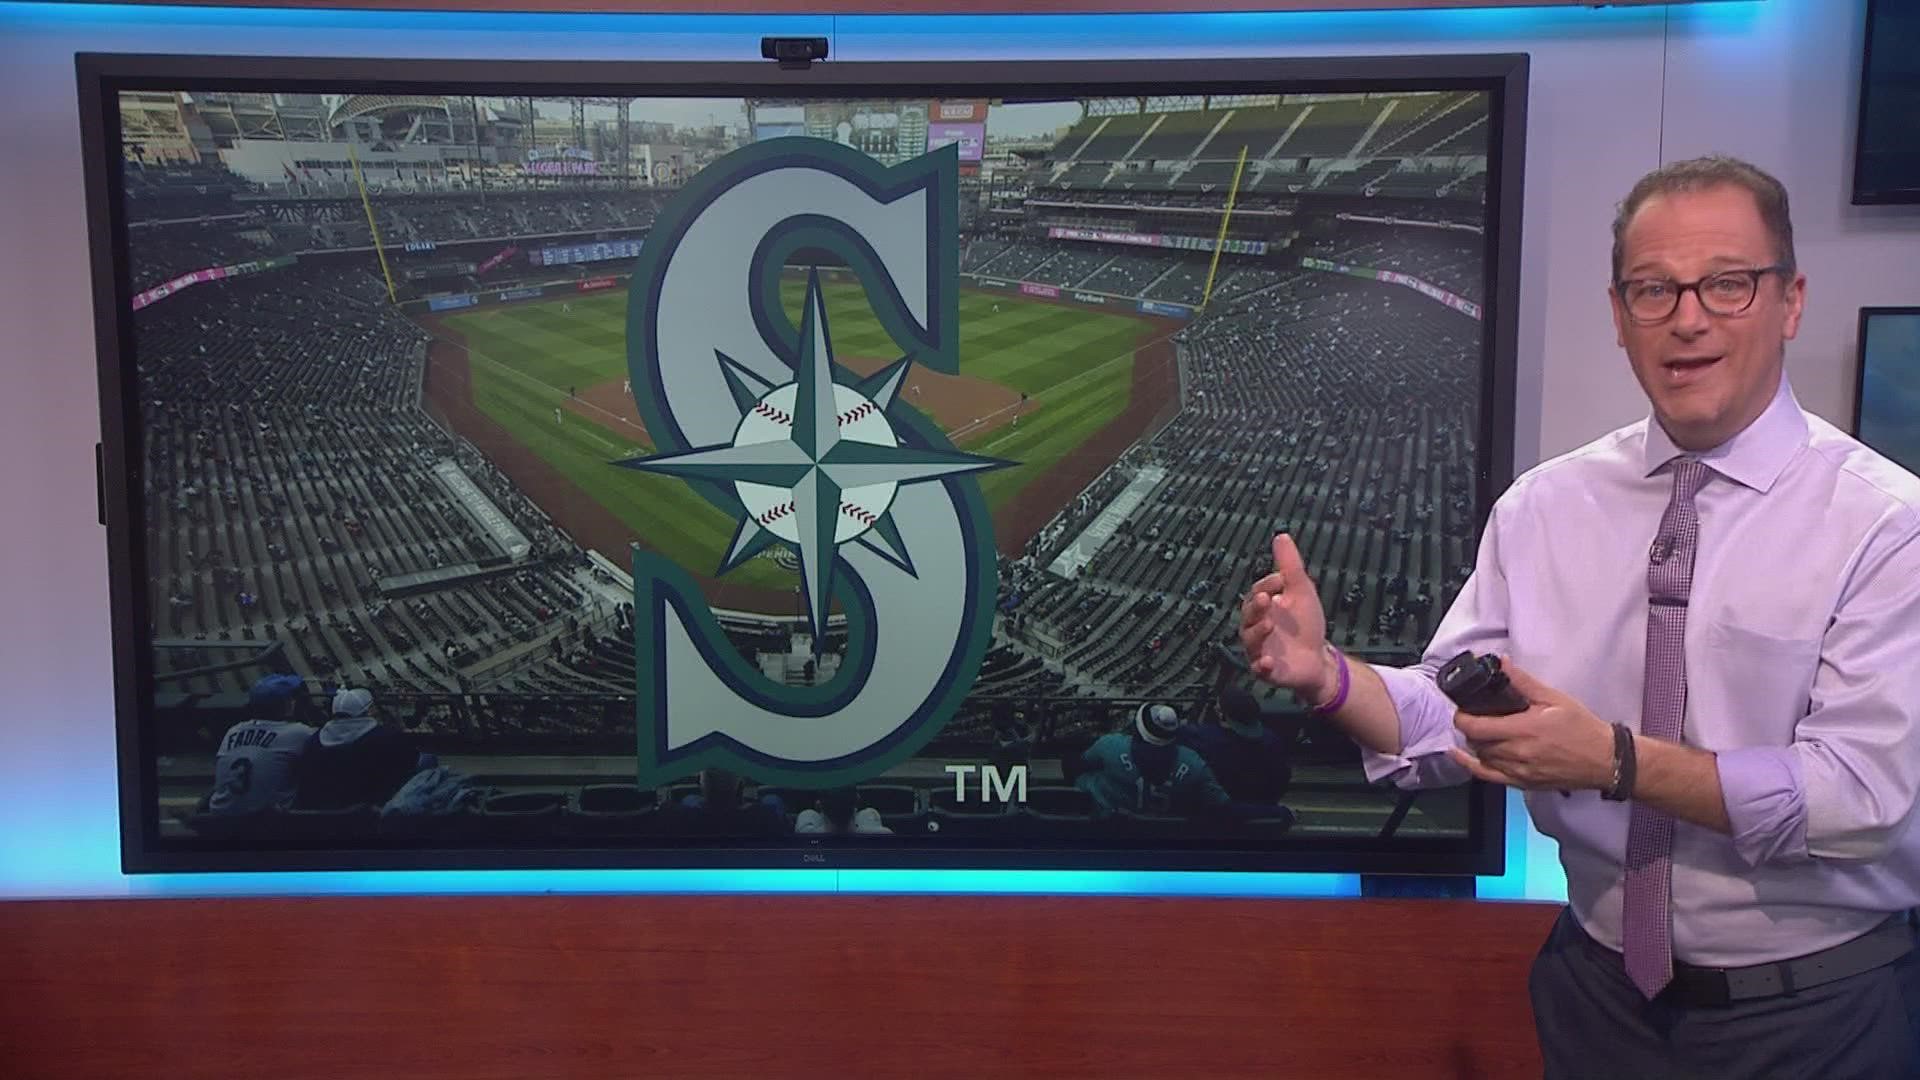 Friday's Mariners game sold out as Seattle competes to make the playoffs